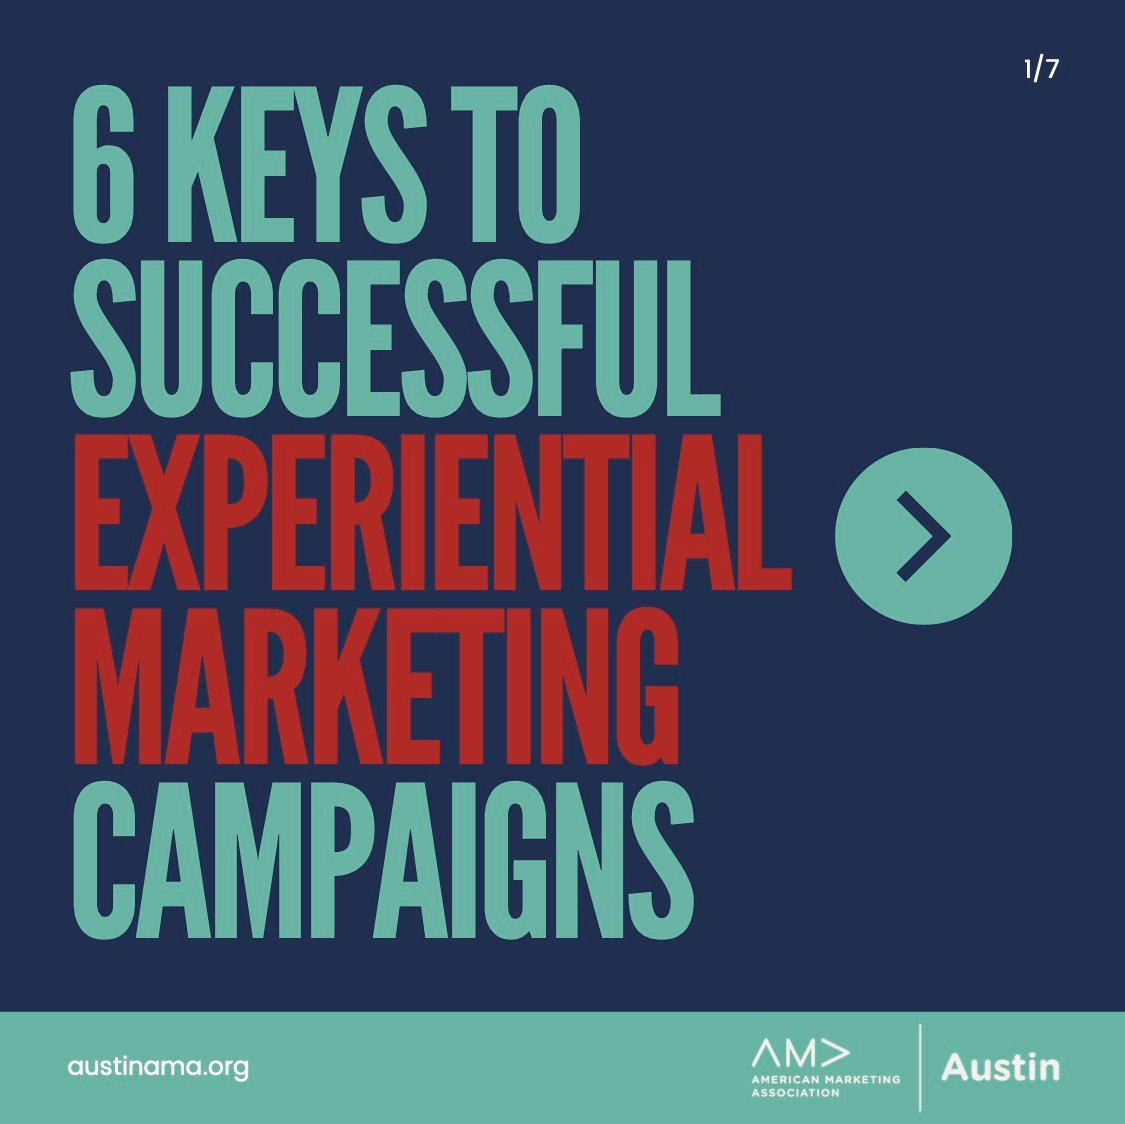 6 Keys to Successful Experiential Marketing Campaigns - 1